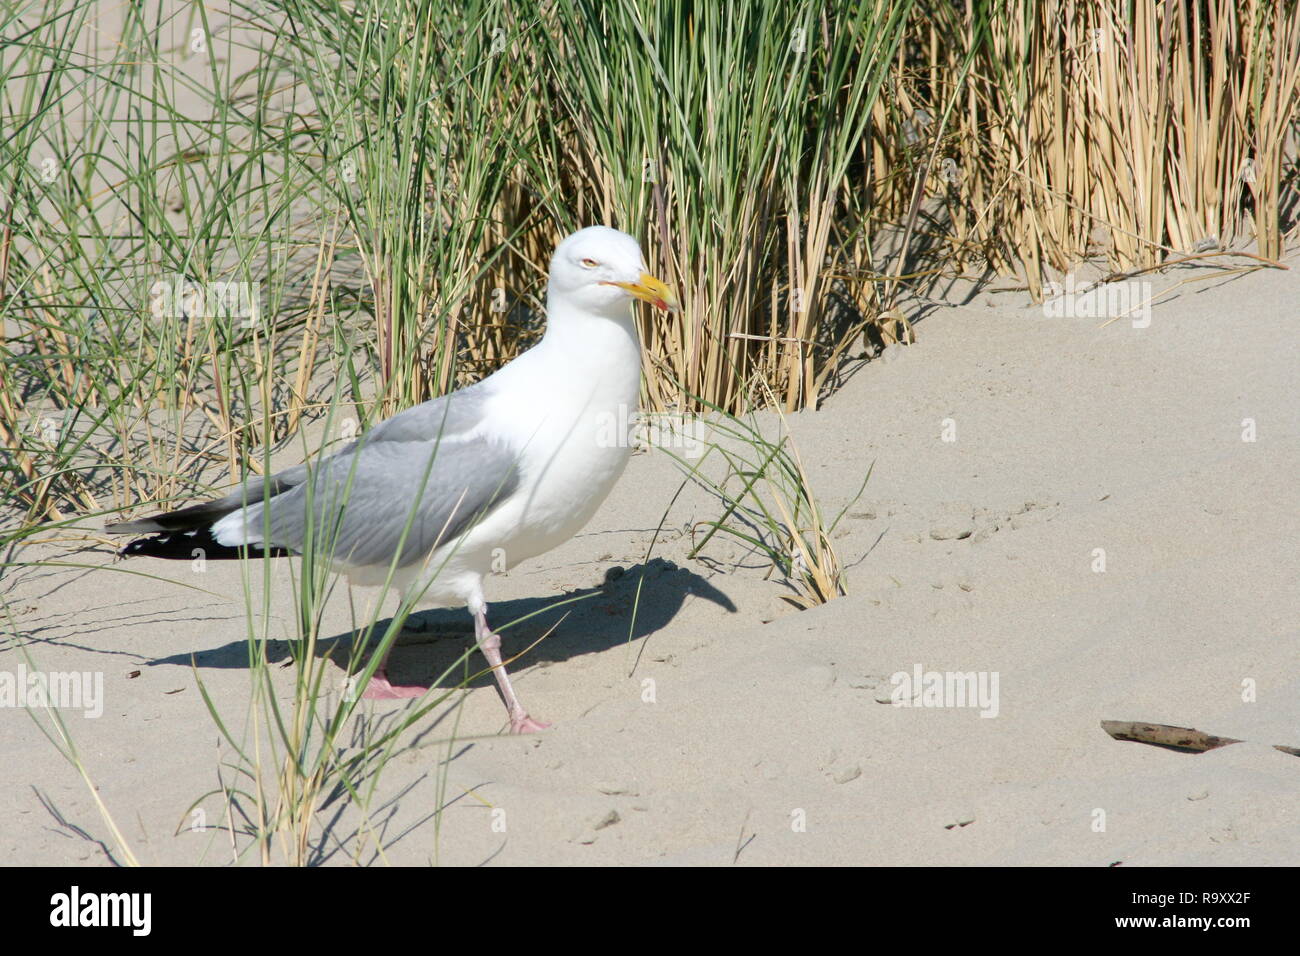 Close-up of a gull sitting on the sand Stock Photo